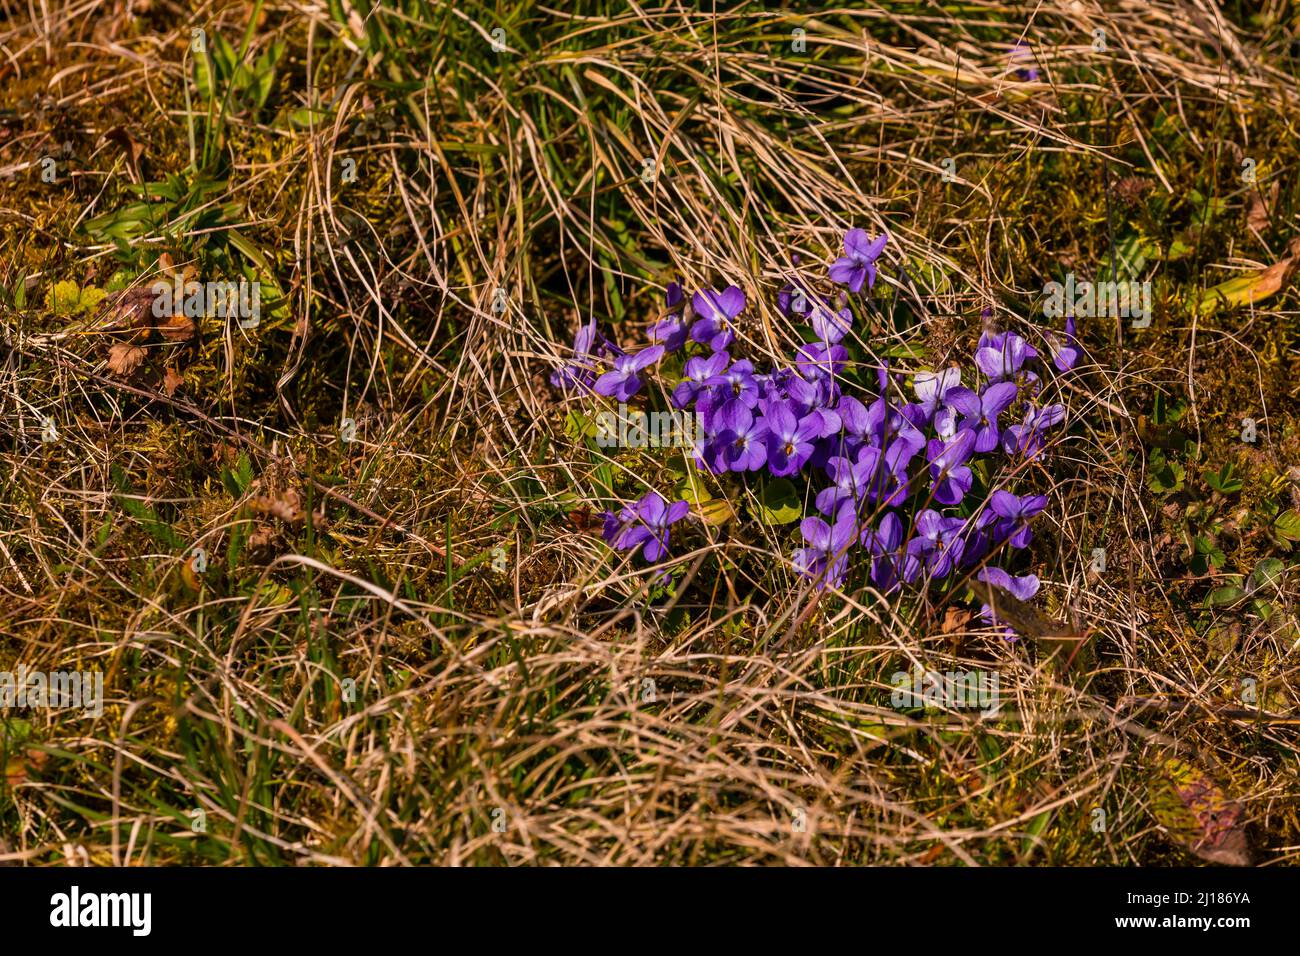 The grass of a meadow is broken up by a bunch of purple violets in spring, Germany Stock Photo